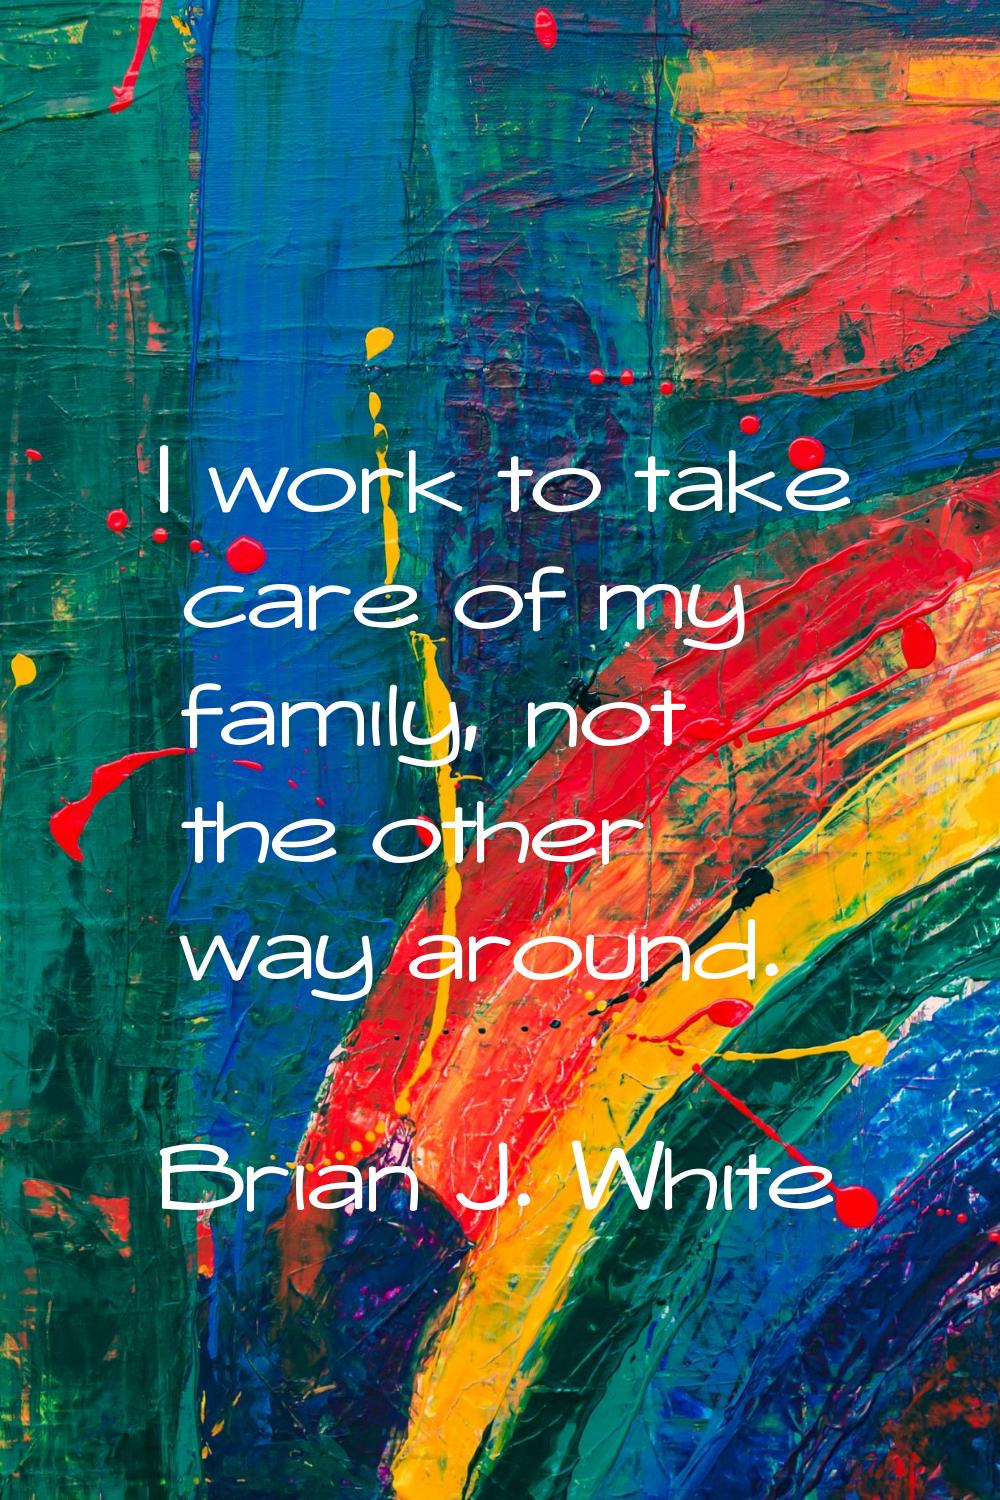 I work to take care of my family, not the other way around.